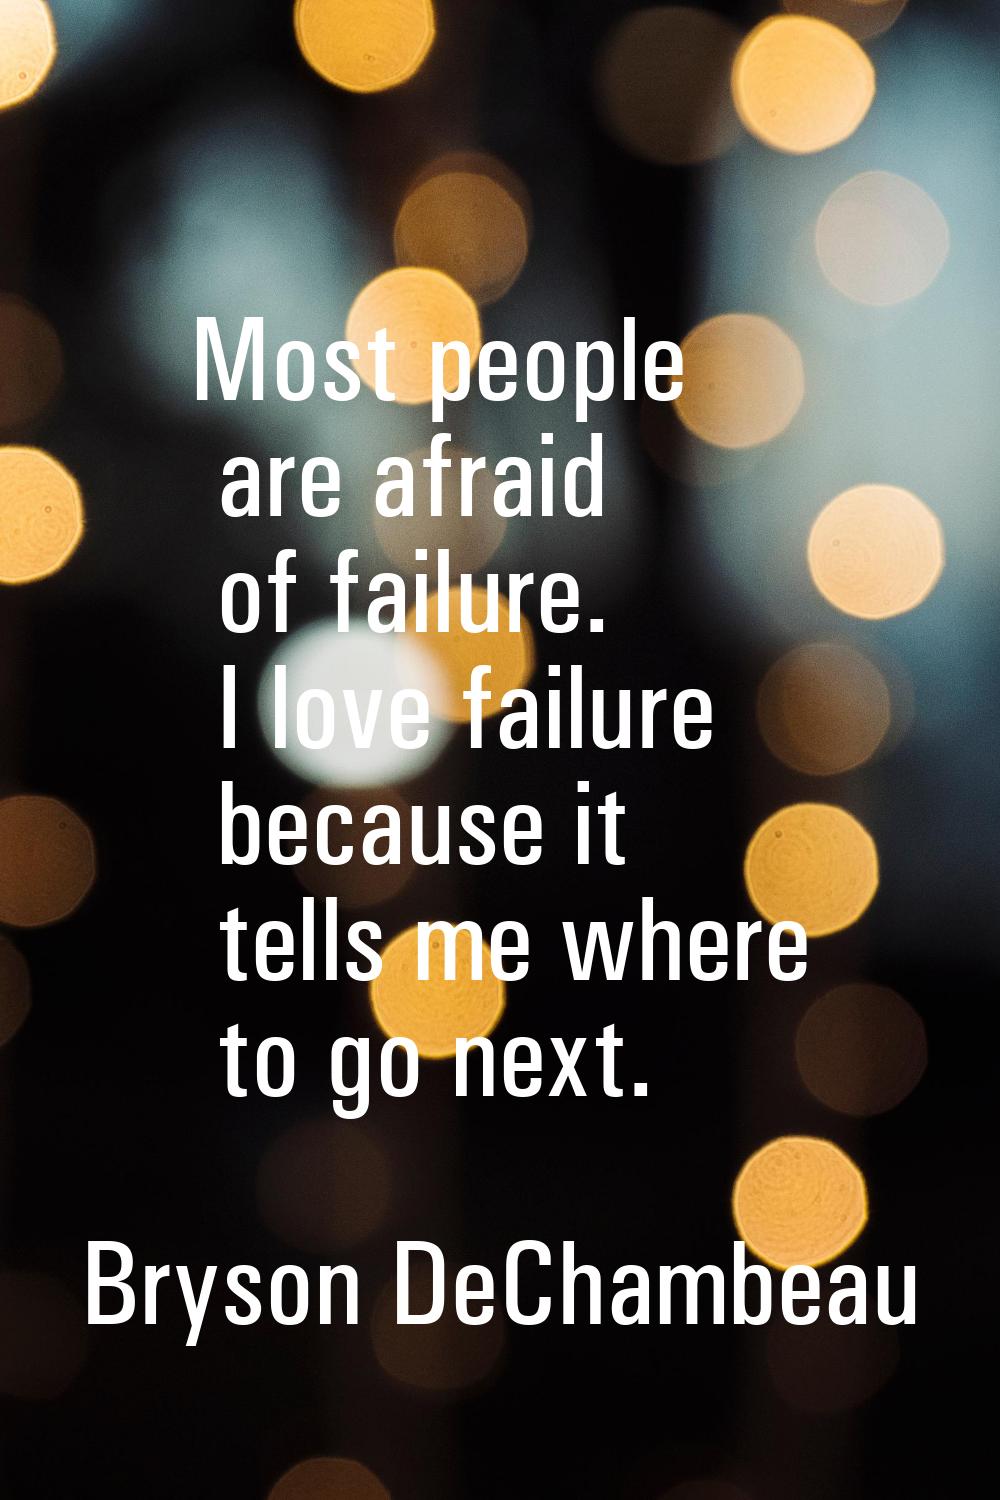 Most people are afraid of failure. I love failure because it tells me where to go next.